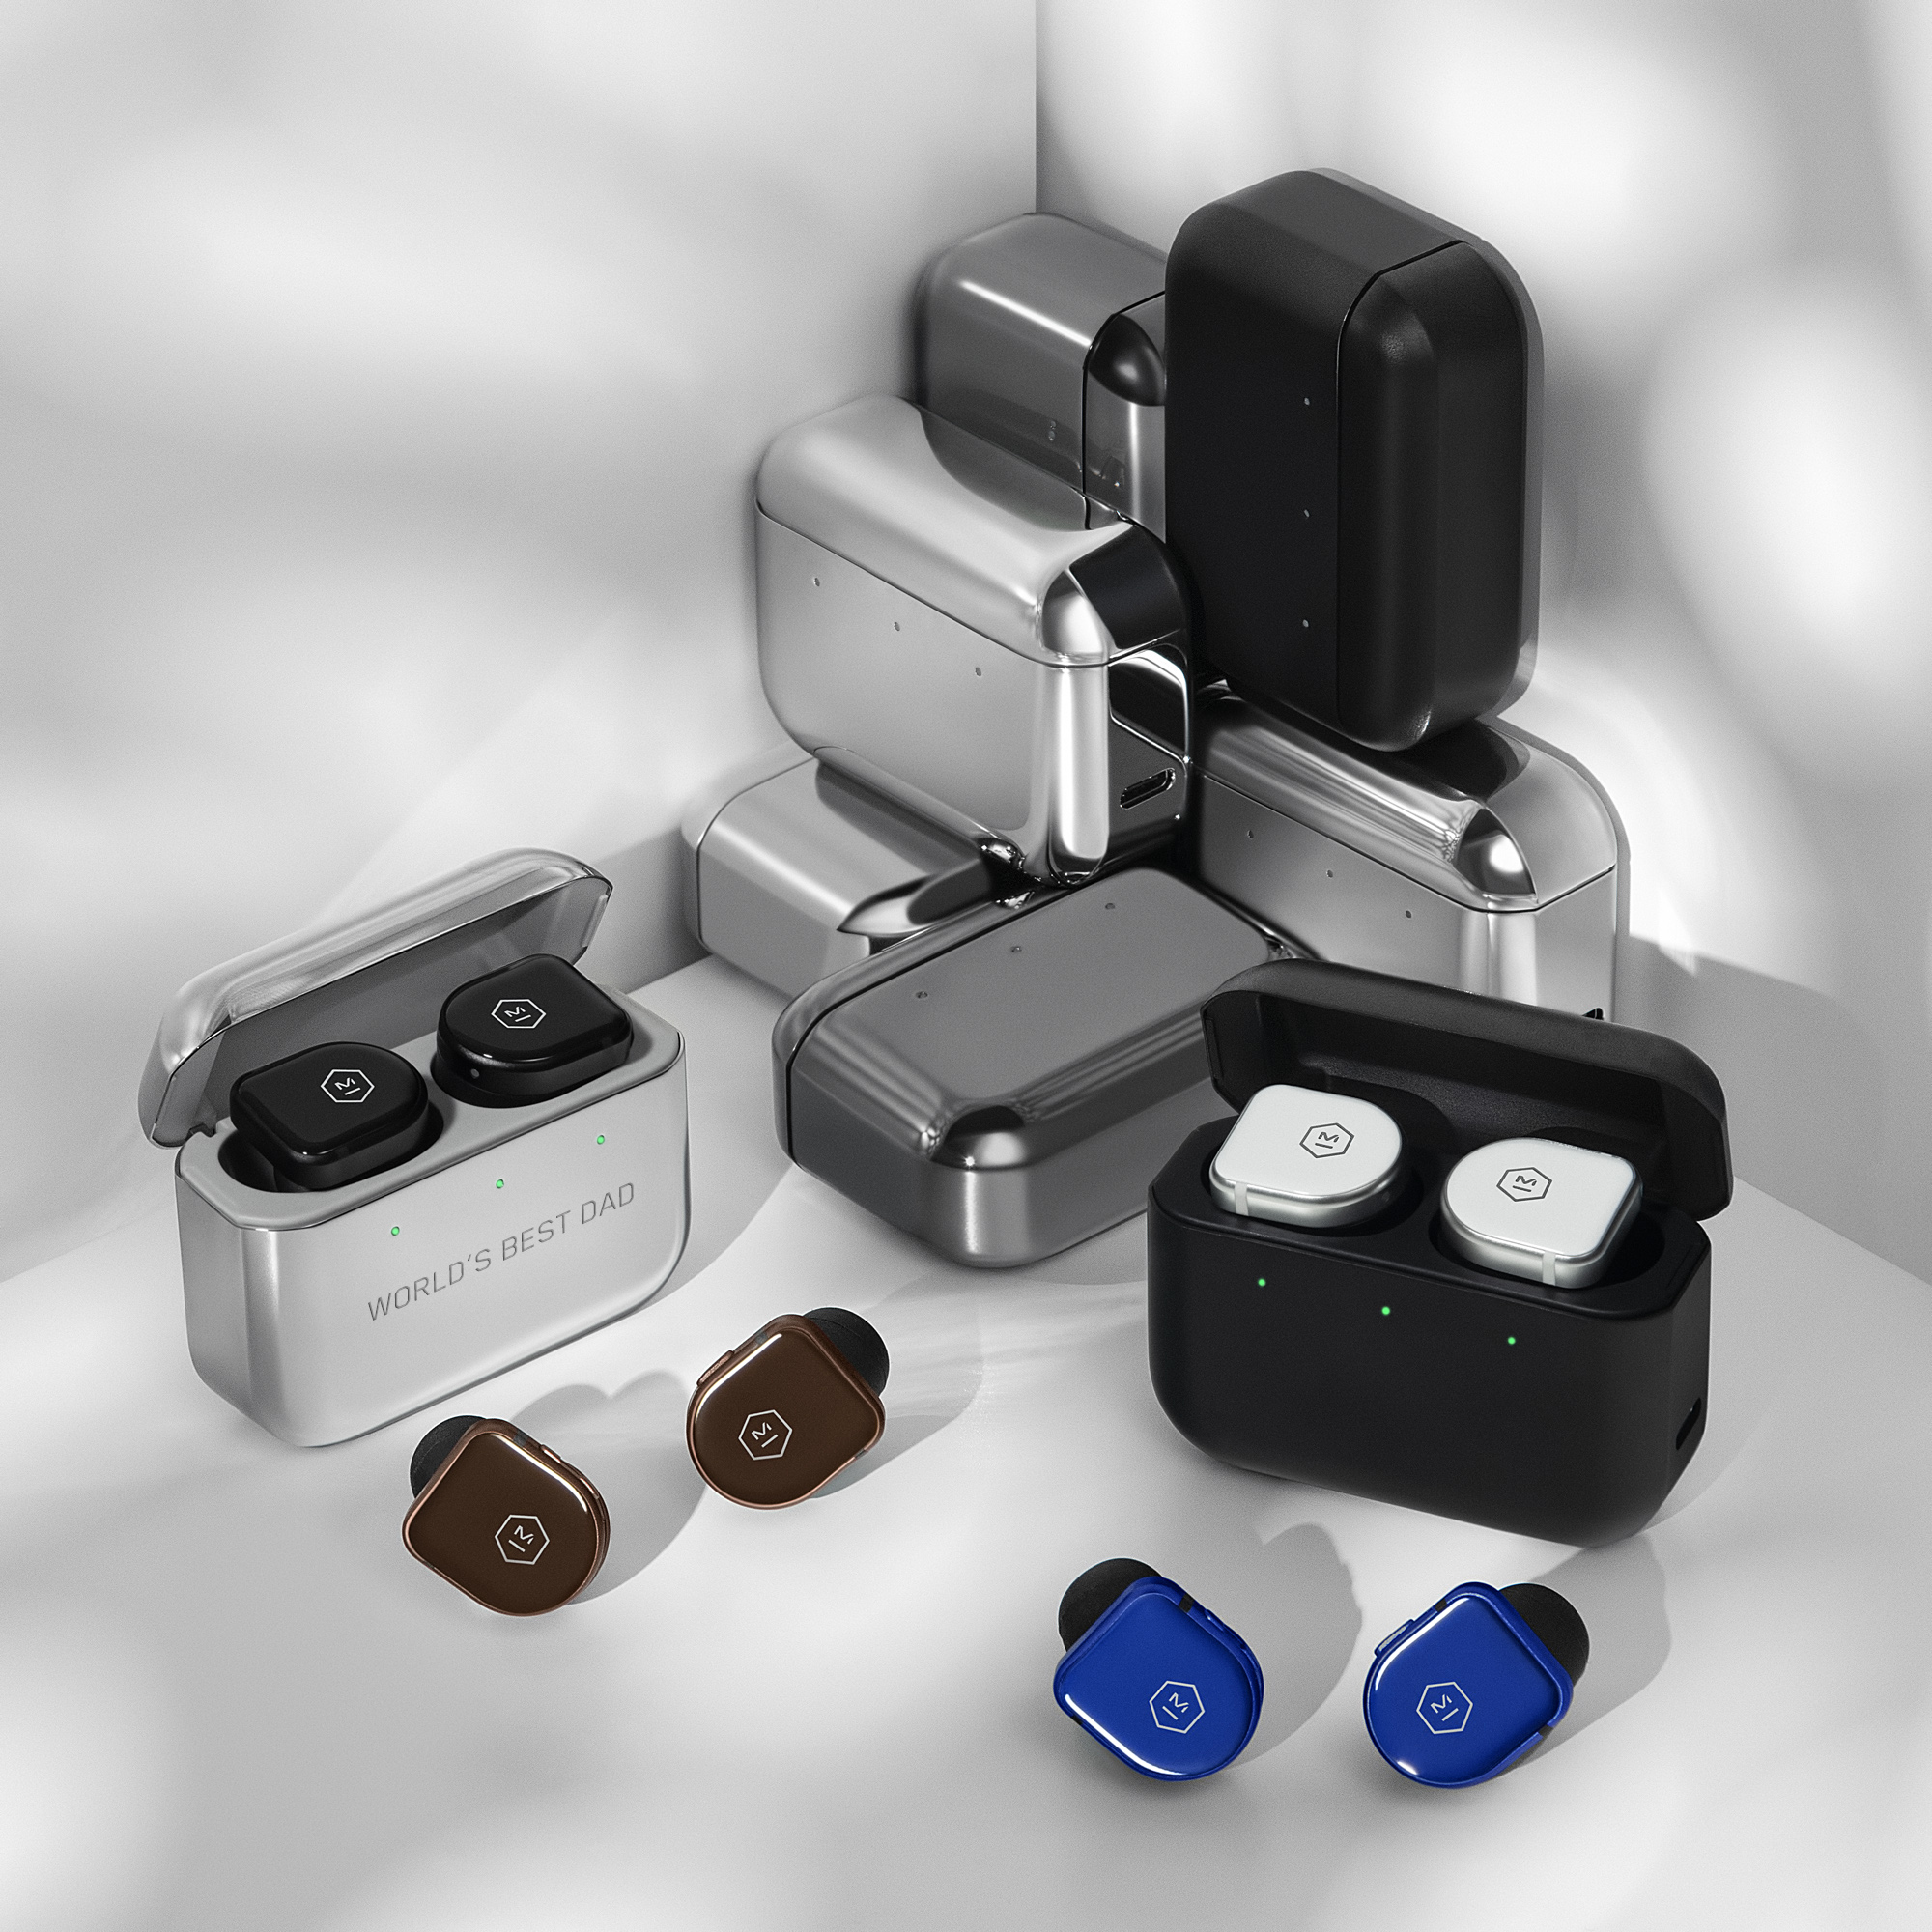 The MW08 True Wireless Earphones with an engraved charging case 